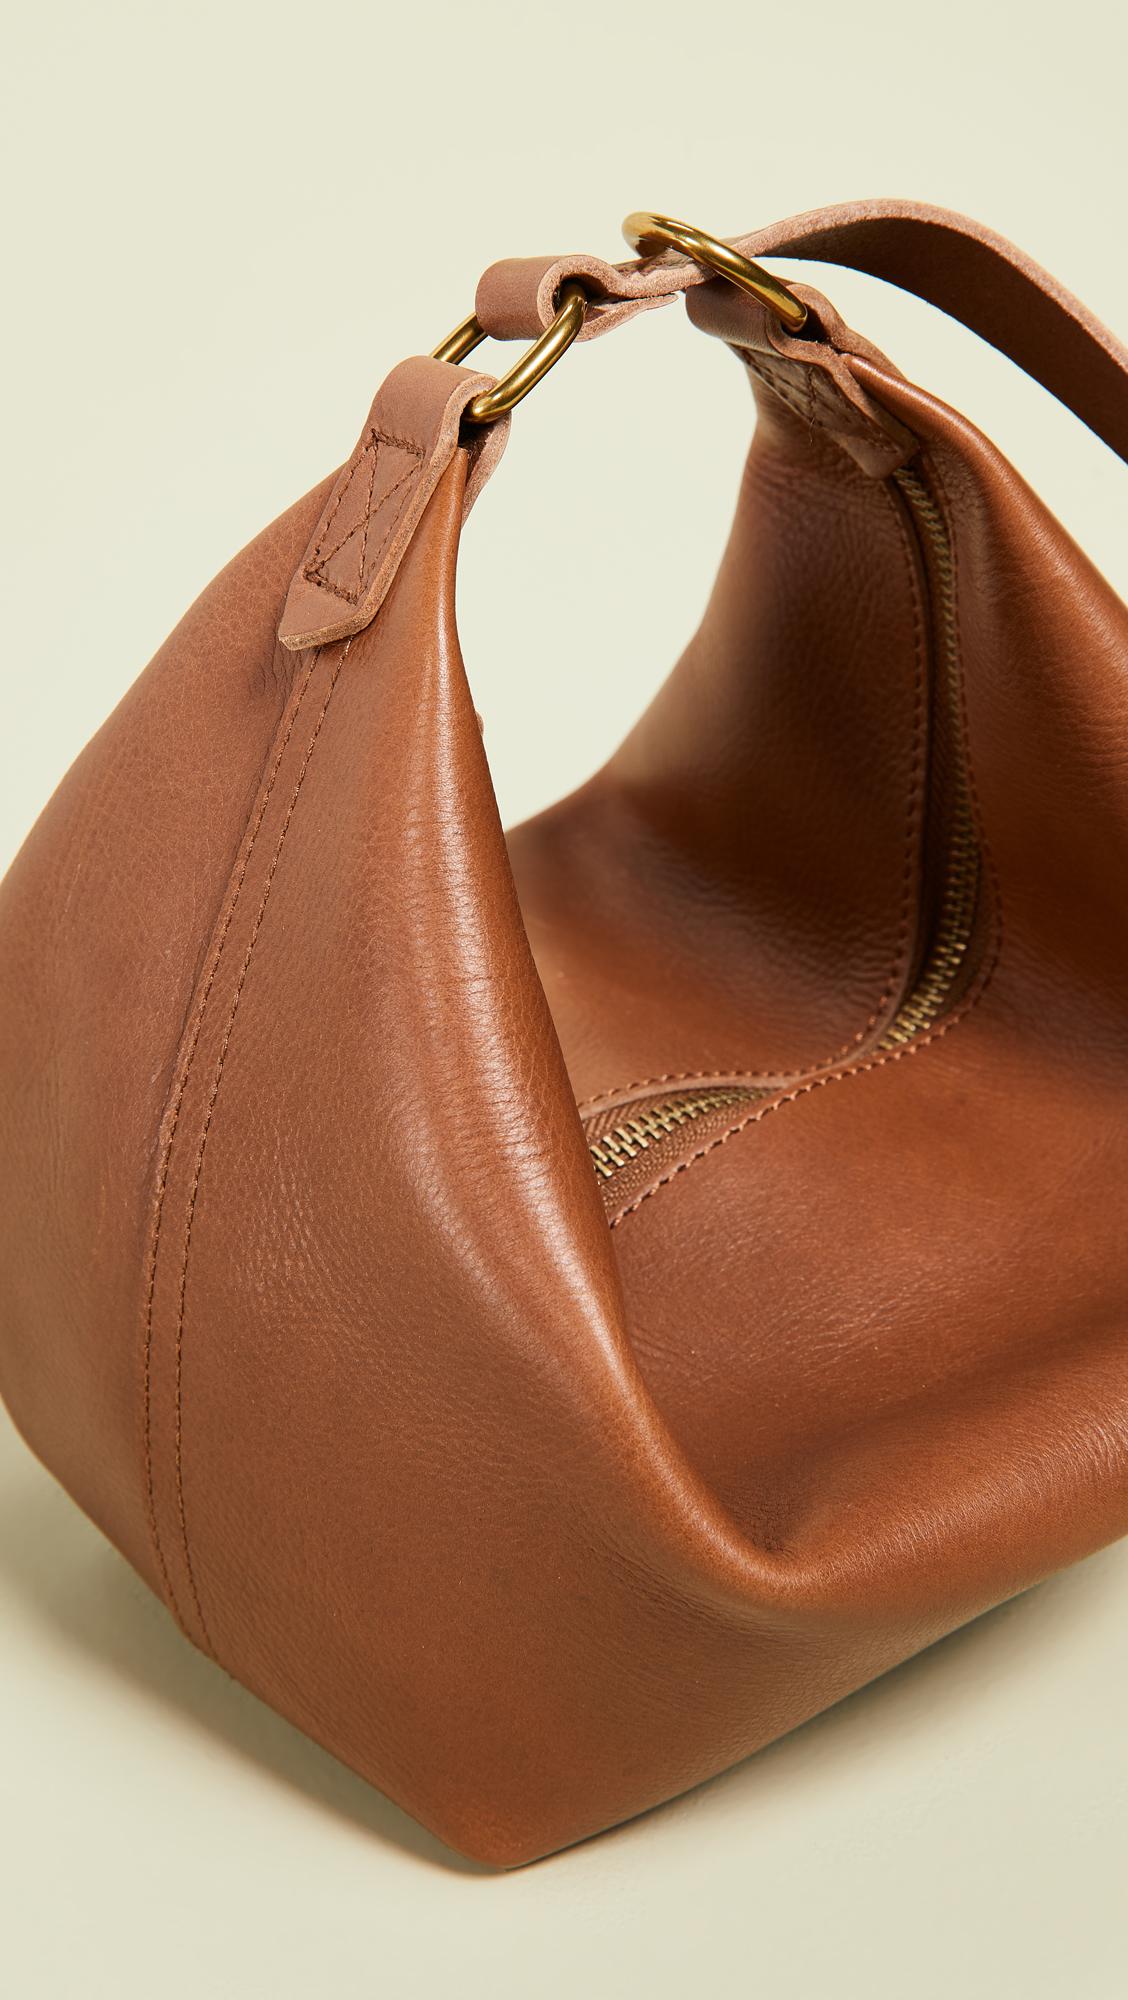 Madewell The Leather Sling Bag in Brown - Lyst